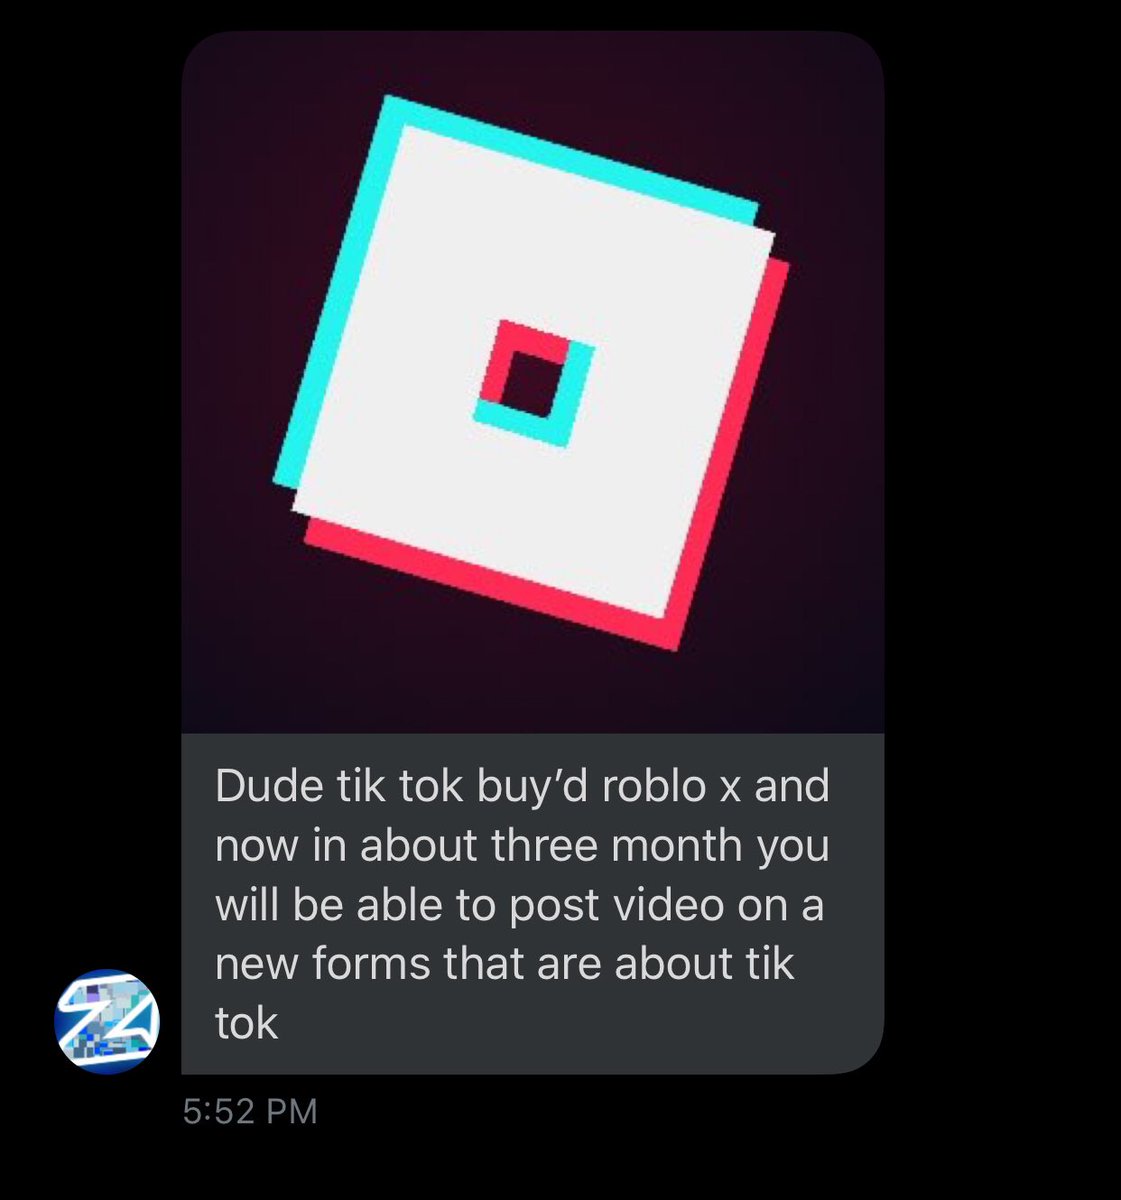 News Roblox On Twitter It Appears That Tikttok Has Bought Roblox A User Has Sent Us The New Logo And Some Extra Informatoion We Expect An Announcing From Either Roblox Or Tiktok - roblox notifications on twitter tix balooza some news